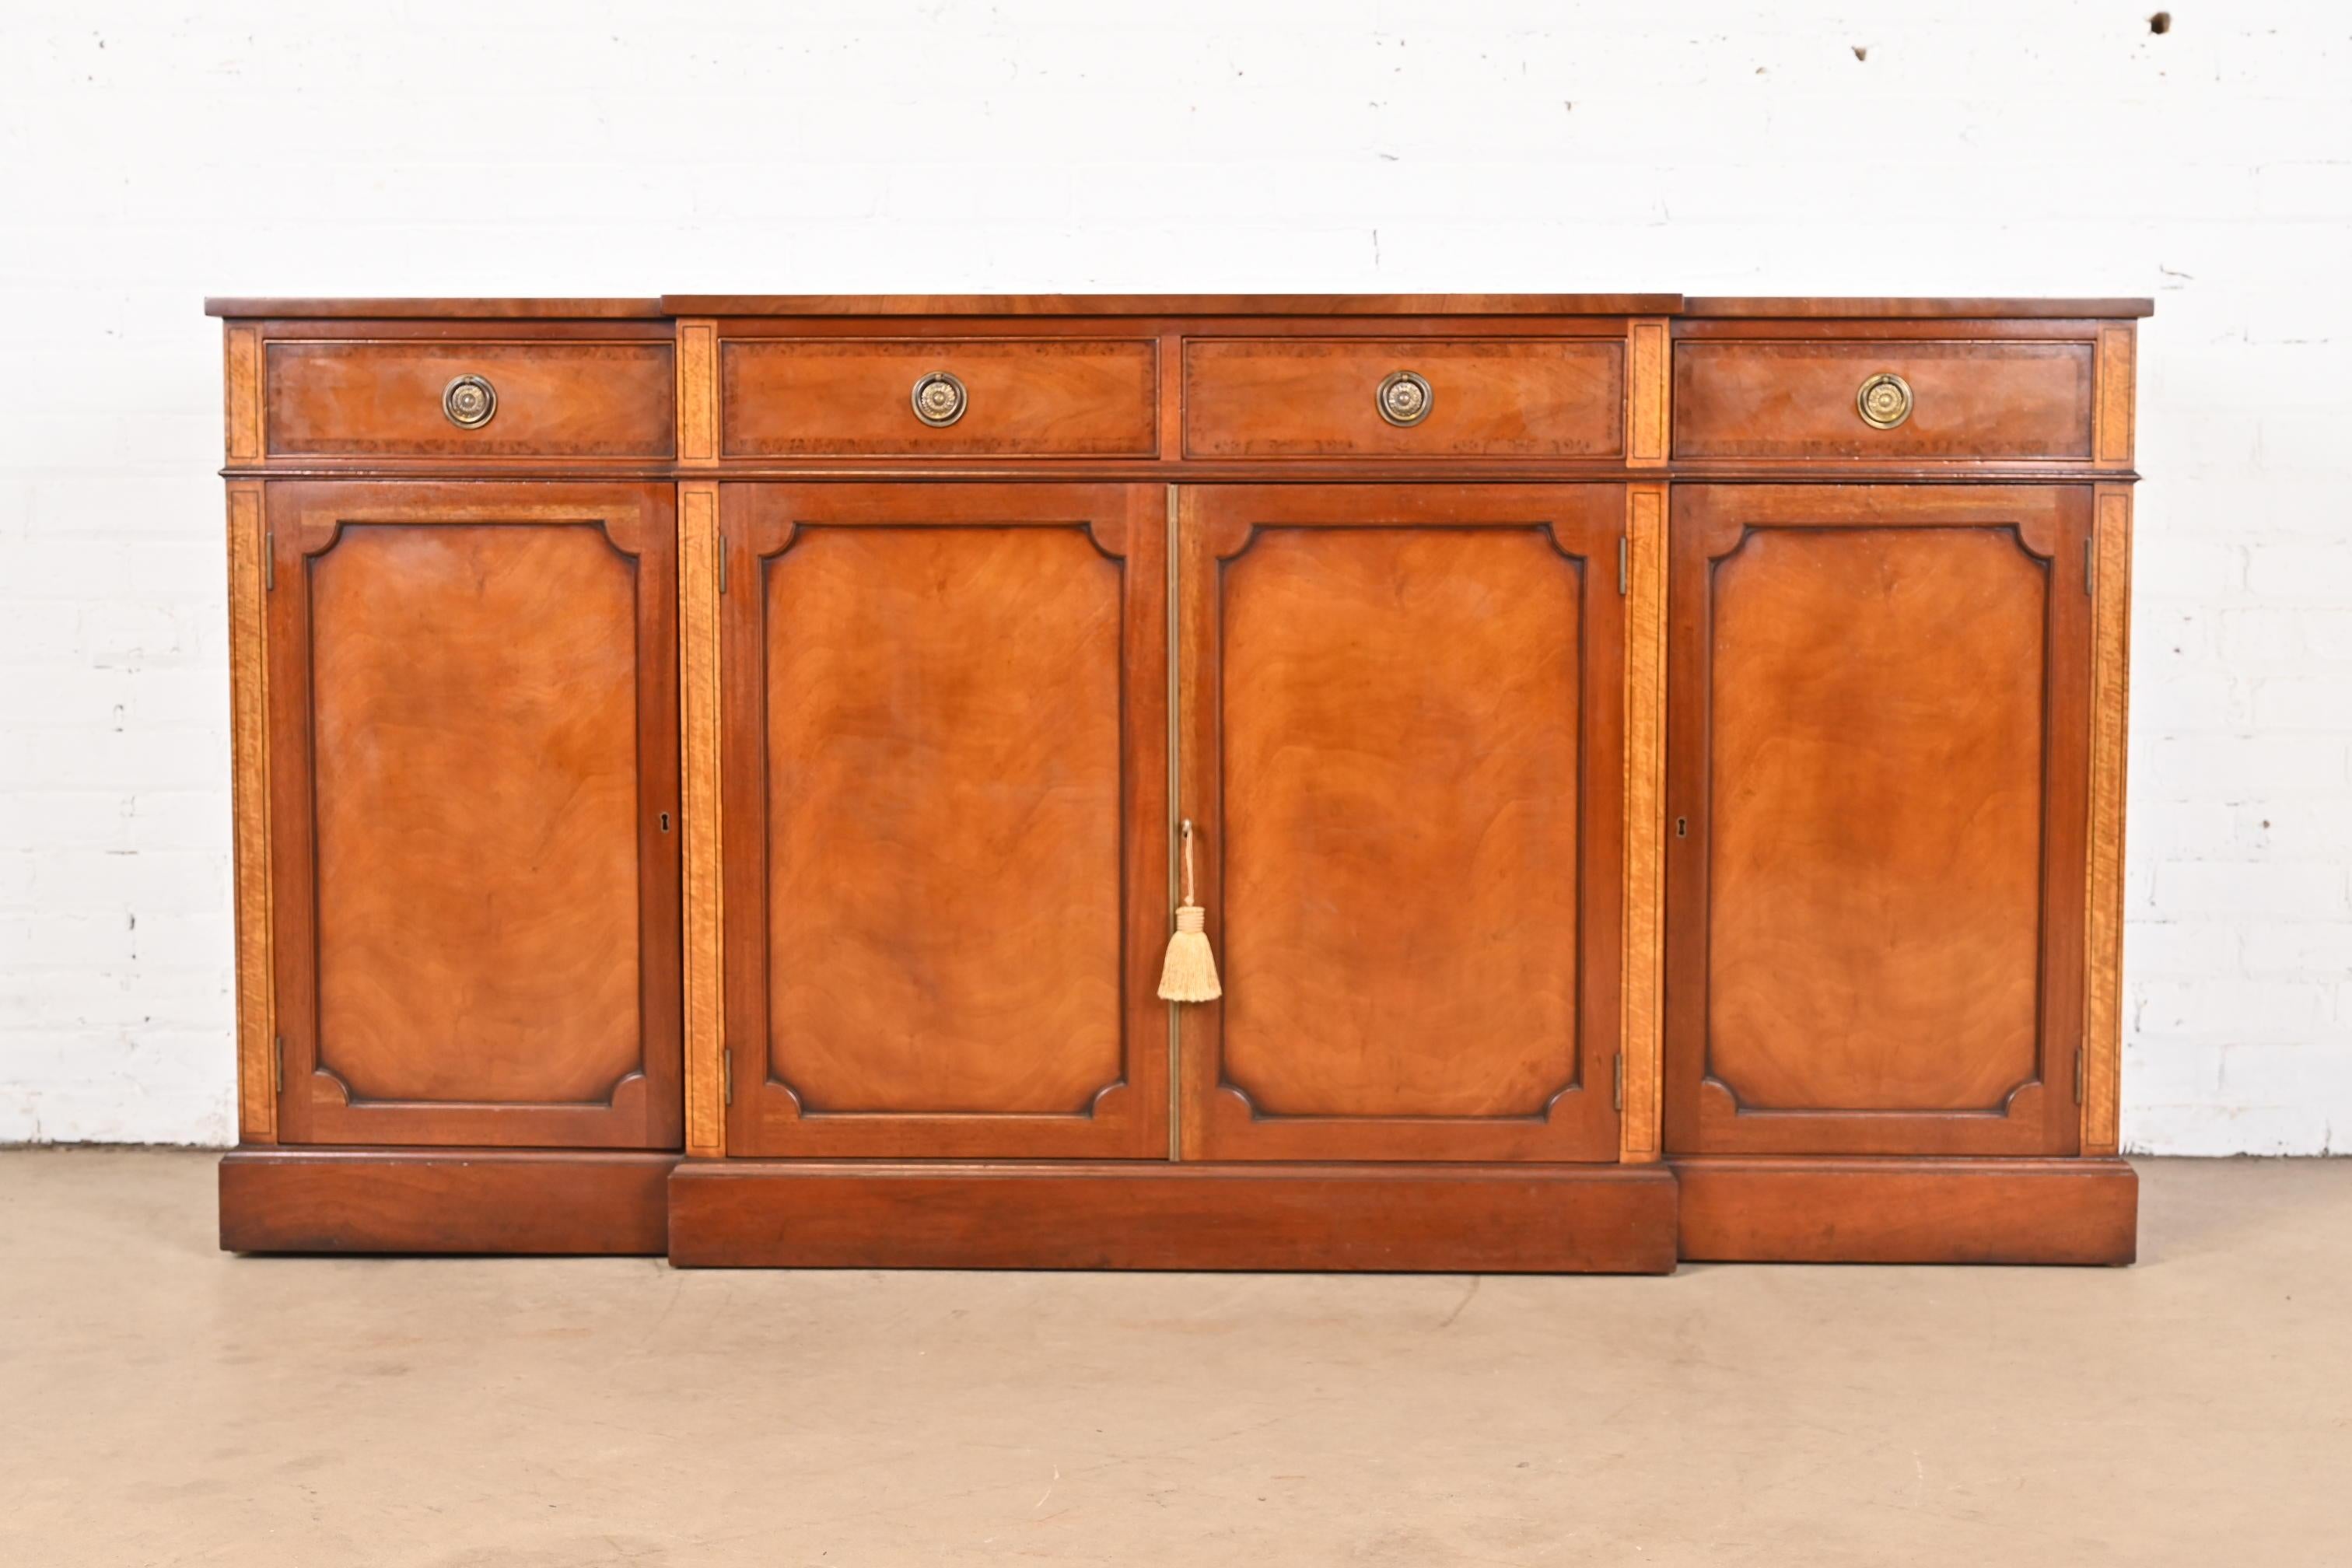 A gorgeous English Georgian or Regency style sideboard, credenza, or bar cabinet

By Restall Brown & Clennell

England, Late 20th Century

Beautiful mahogany, with satinwood and burl wood inlay and banding, and original brass hardware. Cabinets